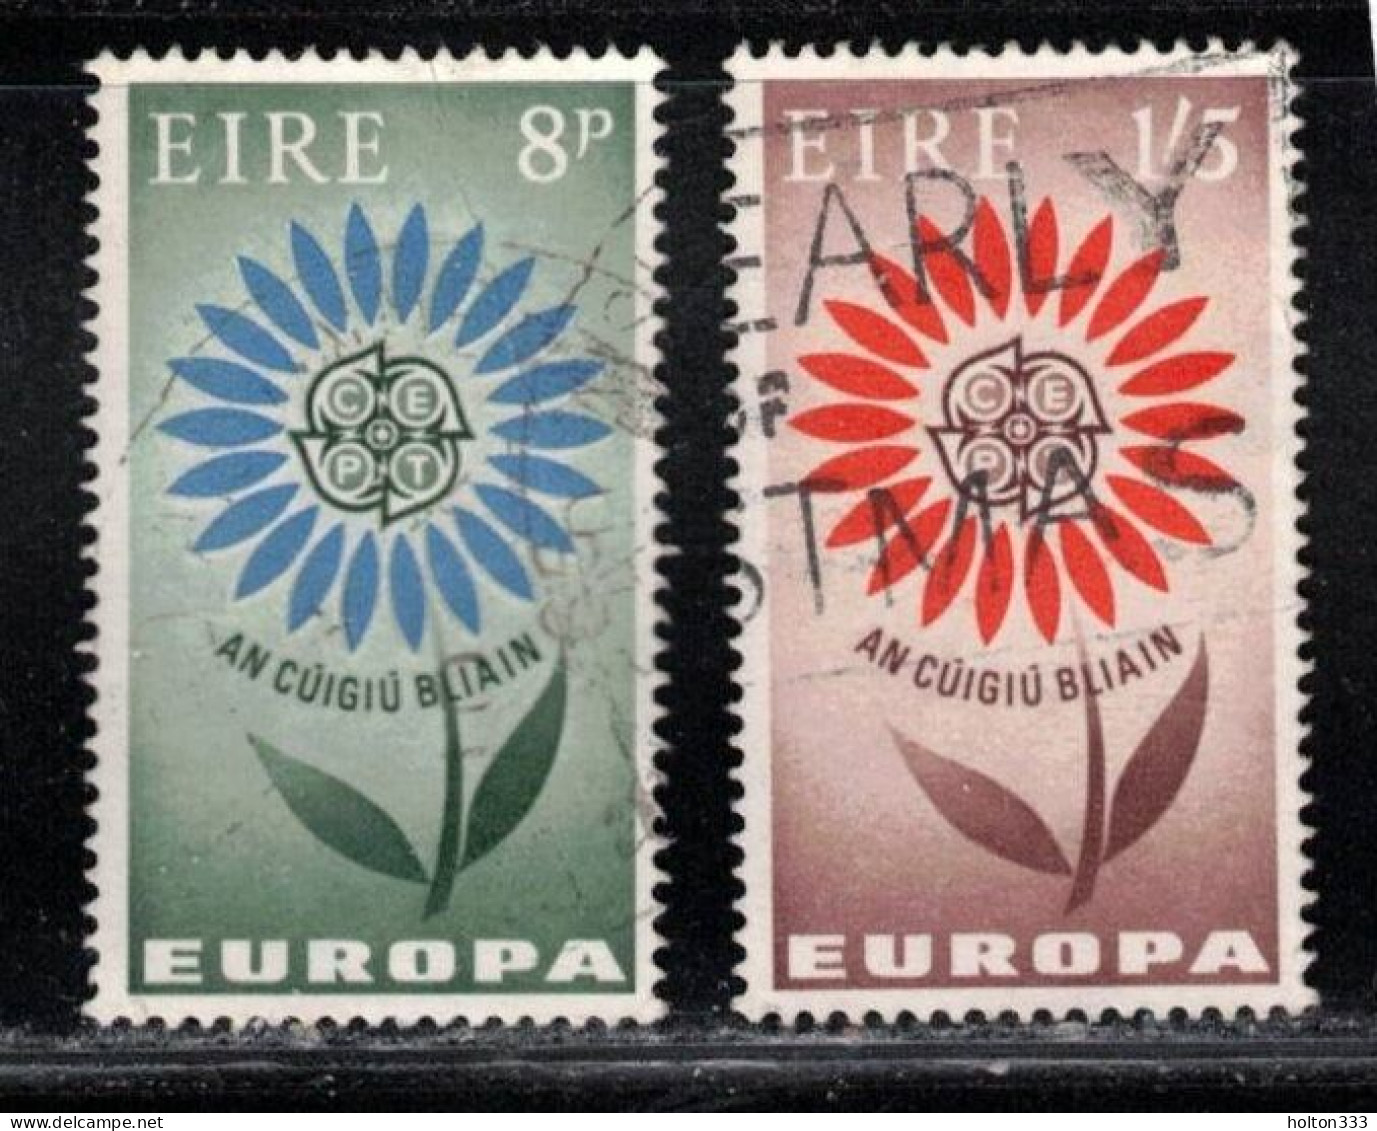 IRELAND Scott # 196-7 Used - 1964 Europa Issue - Used Stamps